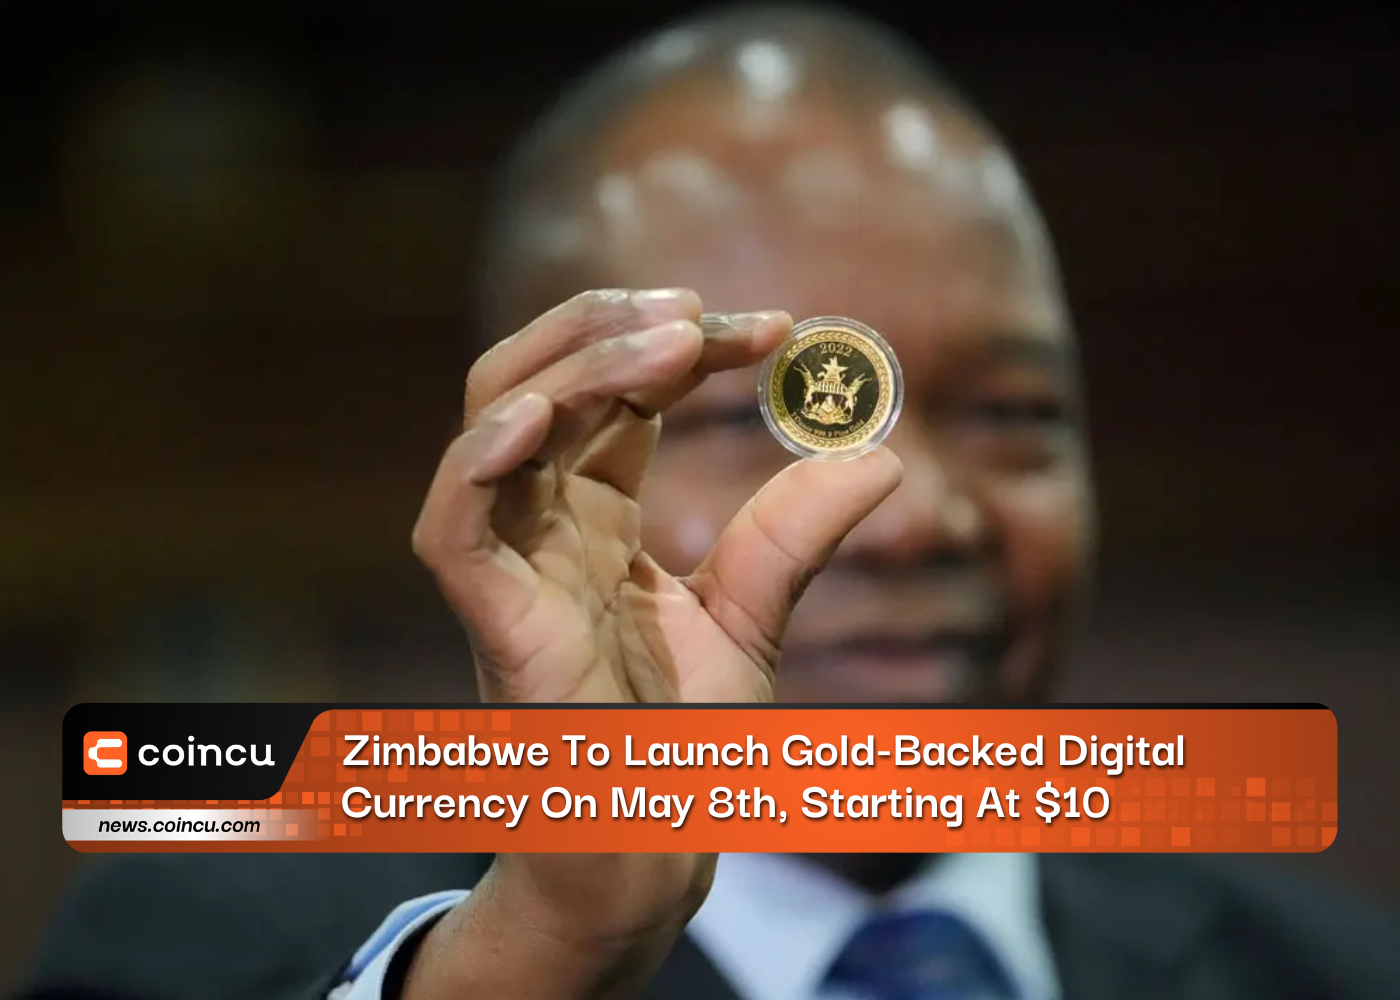 Zimbabwe To Launch Gold-Backed Digital Currency On May 8th, Starting At $10